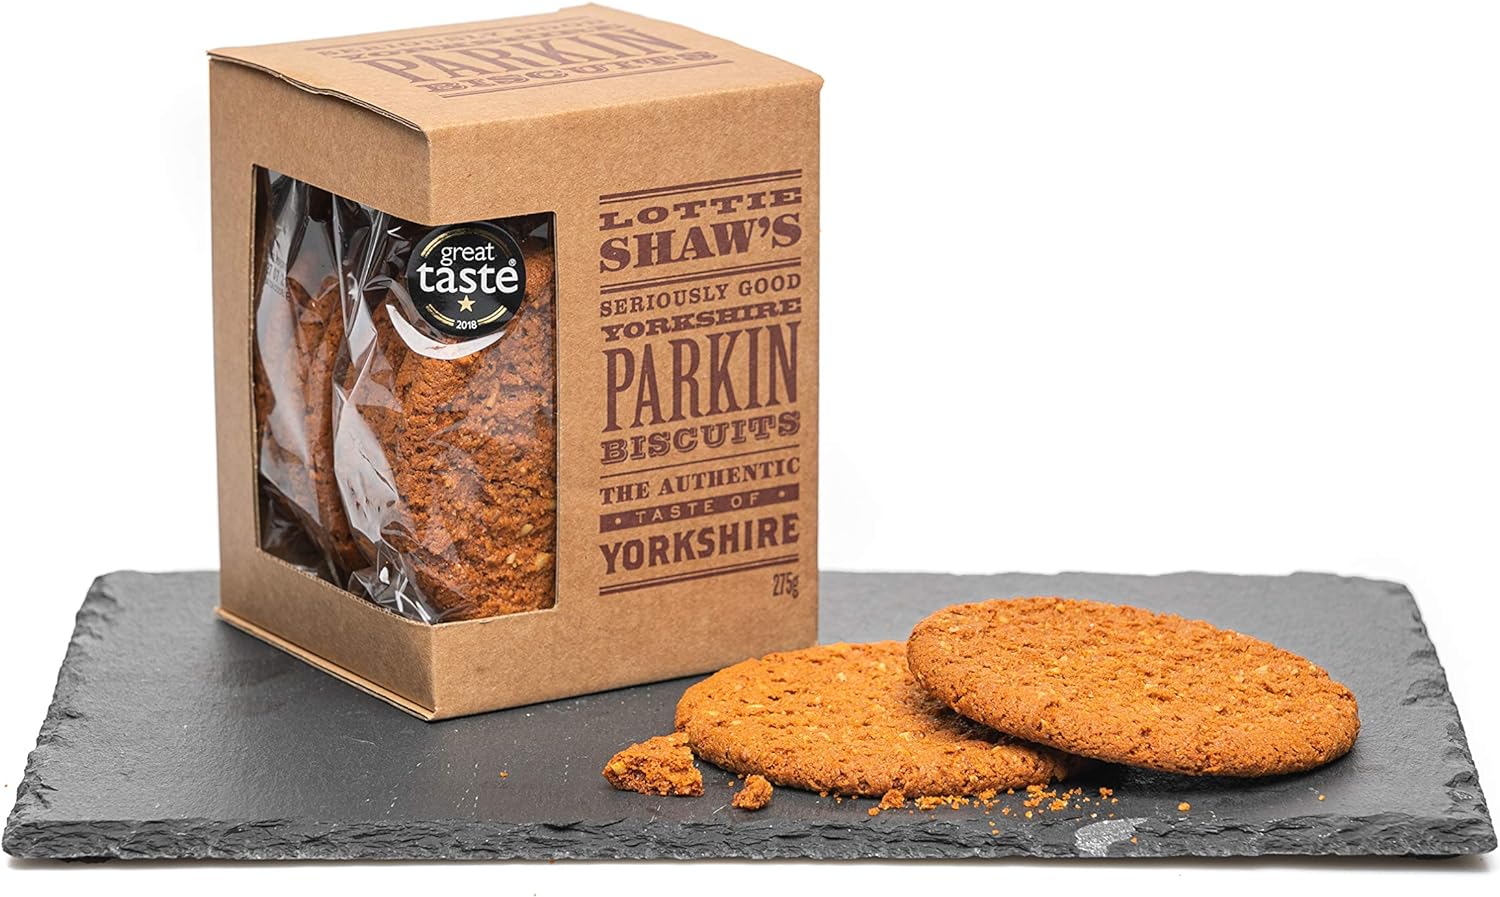 Image name yorkshire parkin biscuits the 16 image from the post Yorkshire Black Friday Deals in Yorkshire.com.